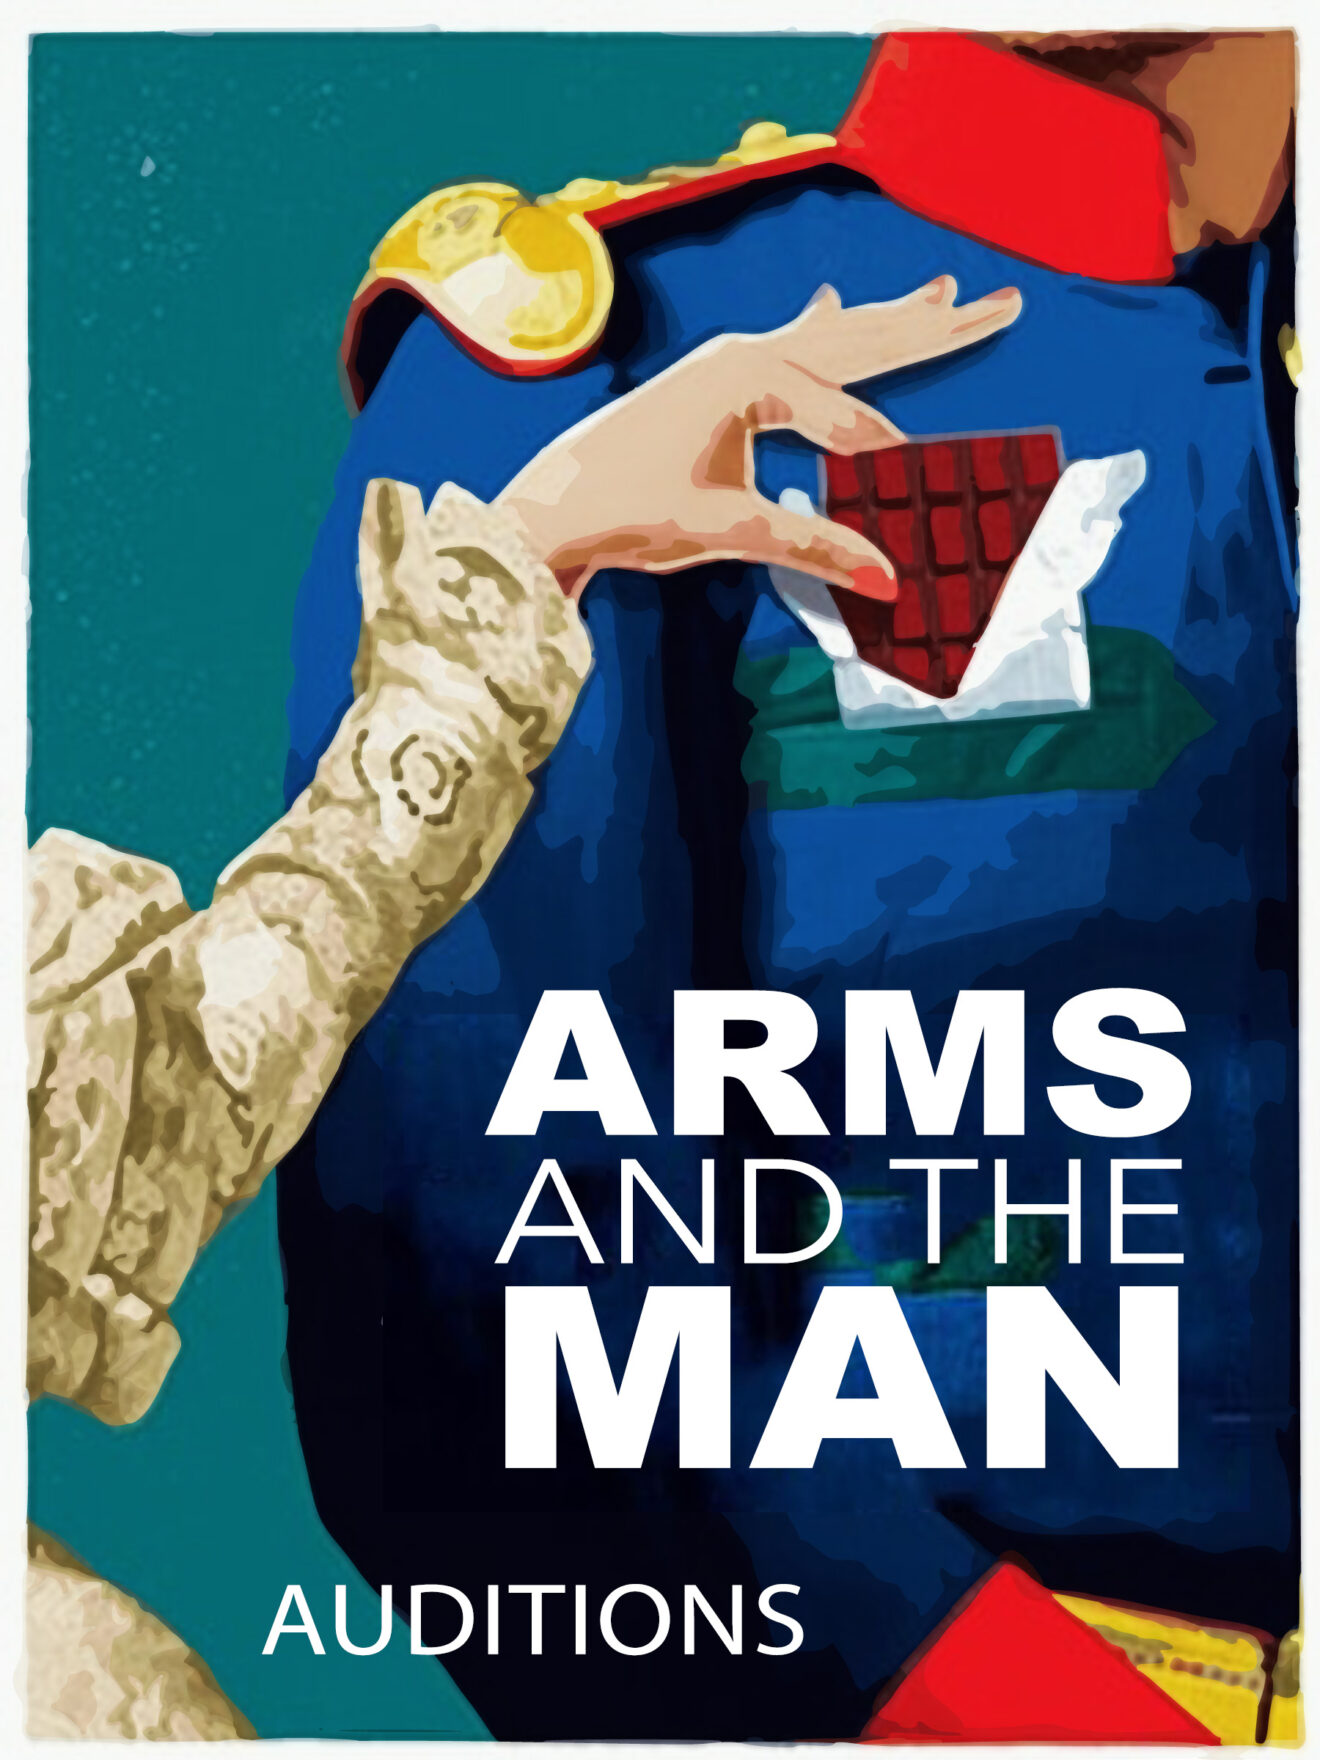 Auditions: ARMS and the MAN